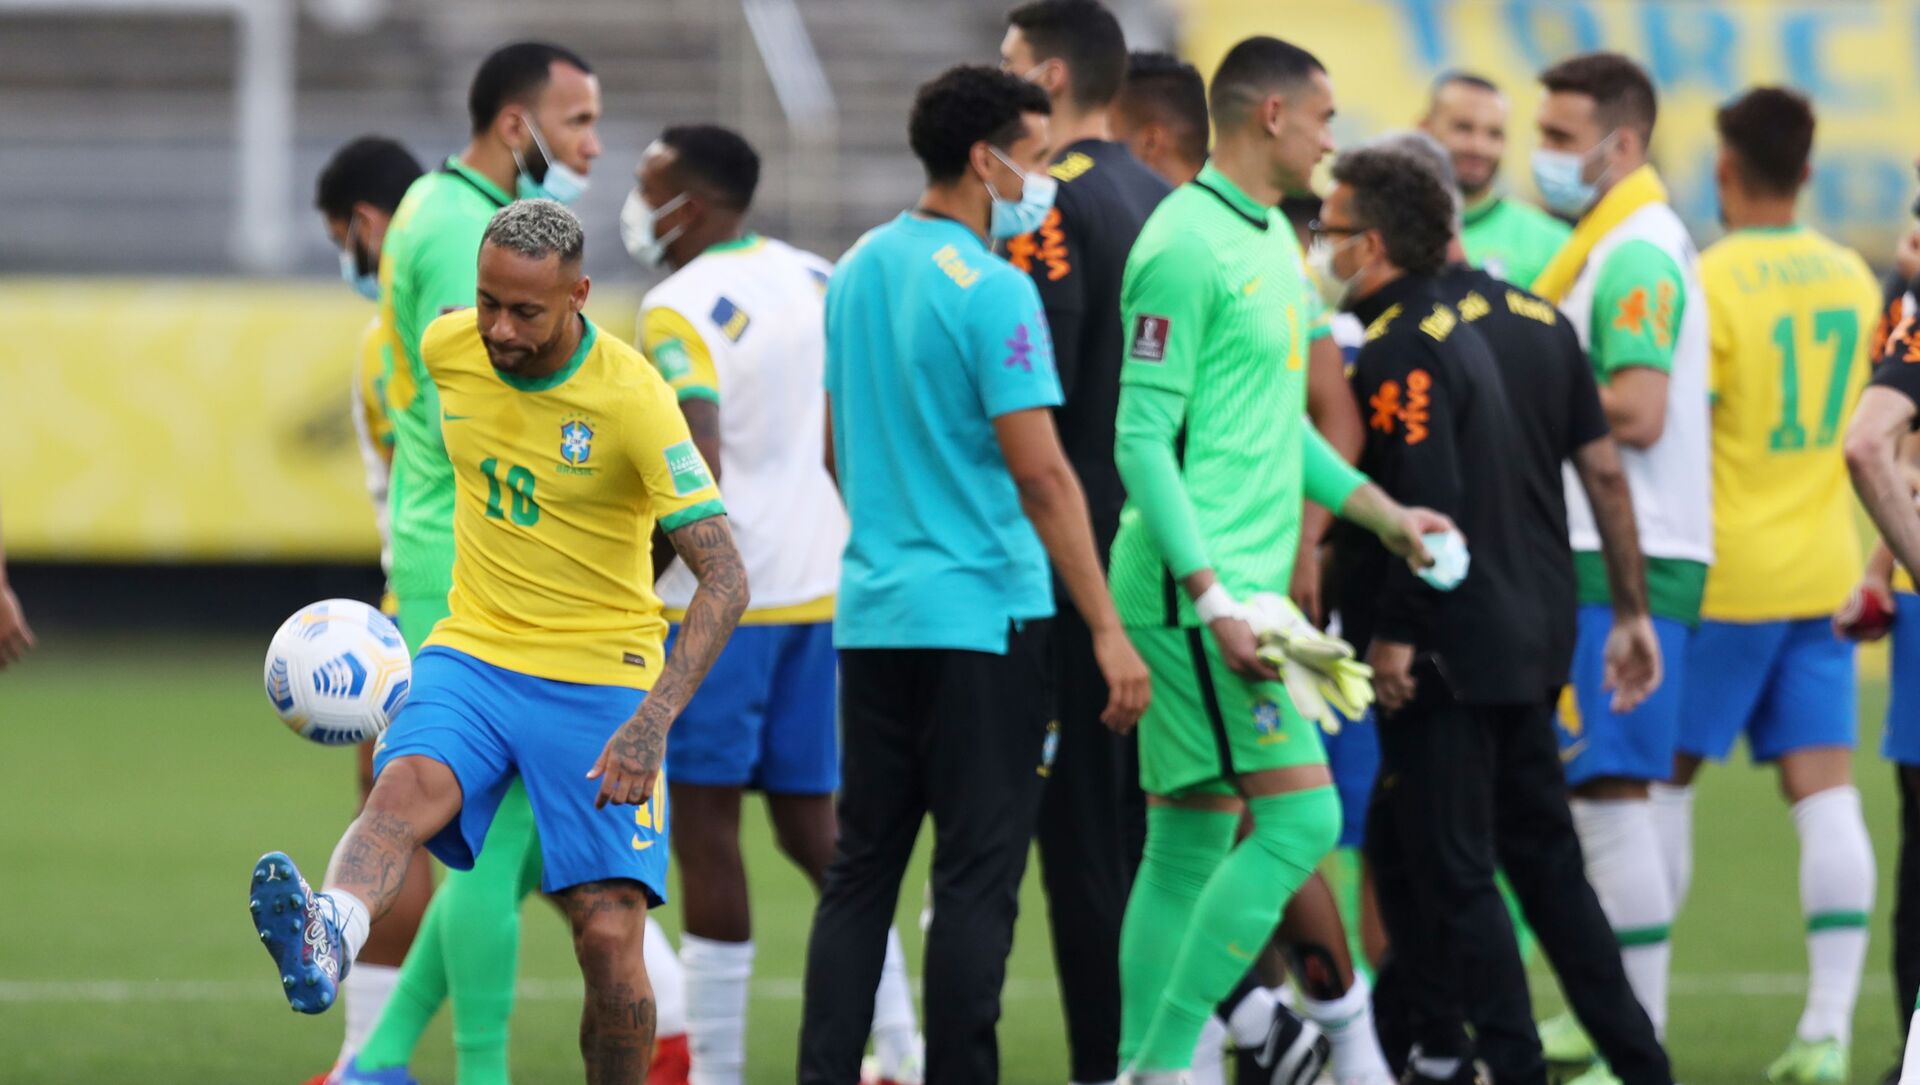 Brazil's Neymar as play is interrupted after Brazilian health officials objected to the participation of three Argentine players they say broke quarantine rules  - Sputnik International, 1920, 06.09.2021